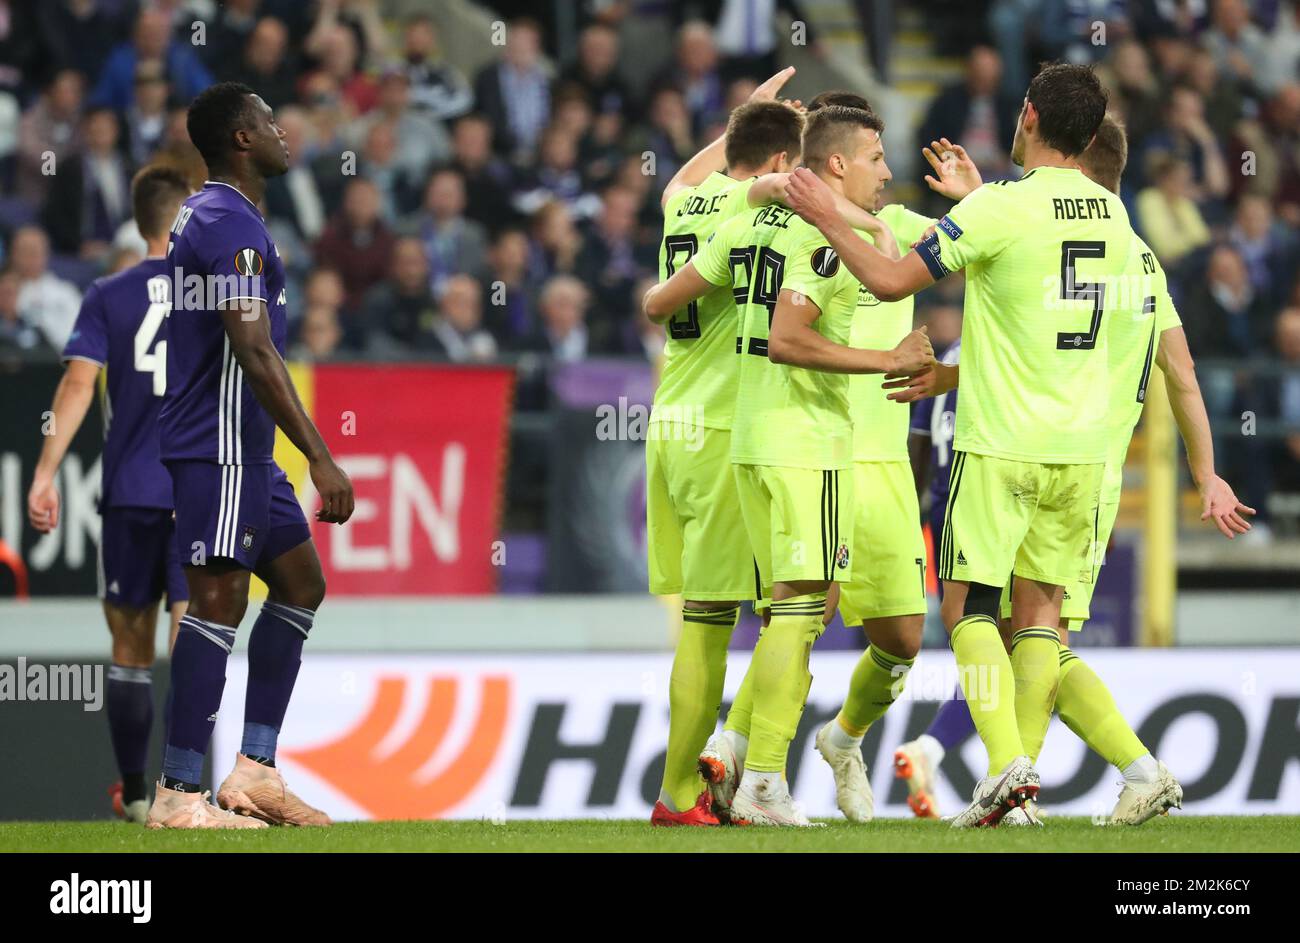 Dinamo Zagreb's midfielder Izet Hajrovic celebrates after scoring during a game of Belgian soccer team RSC Anderlecht against Croatian team Dinamo Zagreb in Anderlecht, Thursday 04 October 2018, on day two of the Europa League group stage, in group D. BELGA PHOTO VIRGINIE LEFOUR Stock Photo